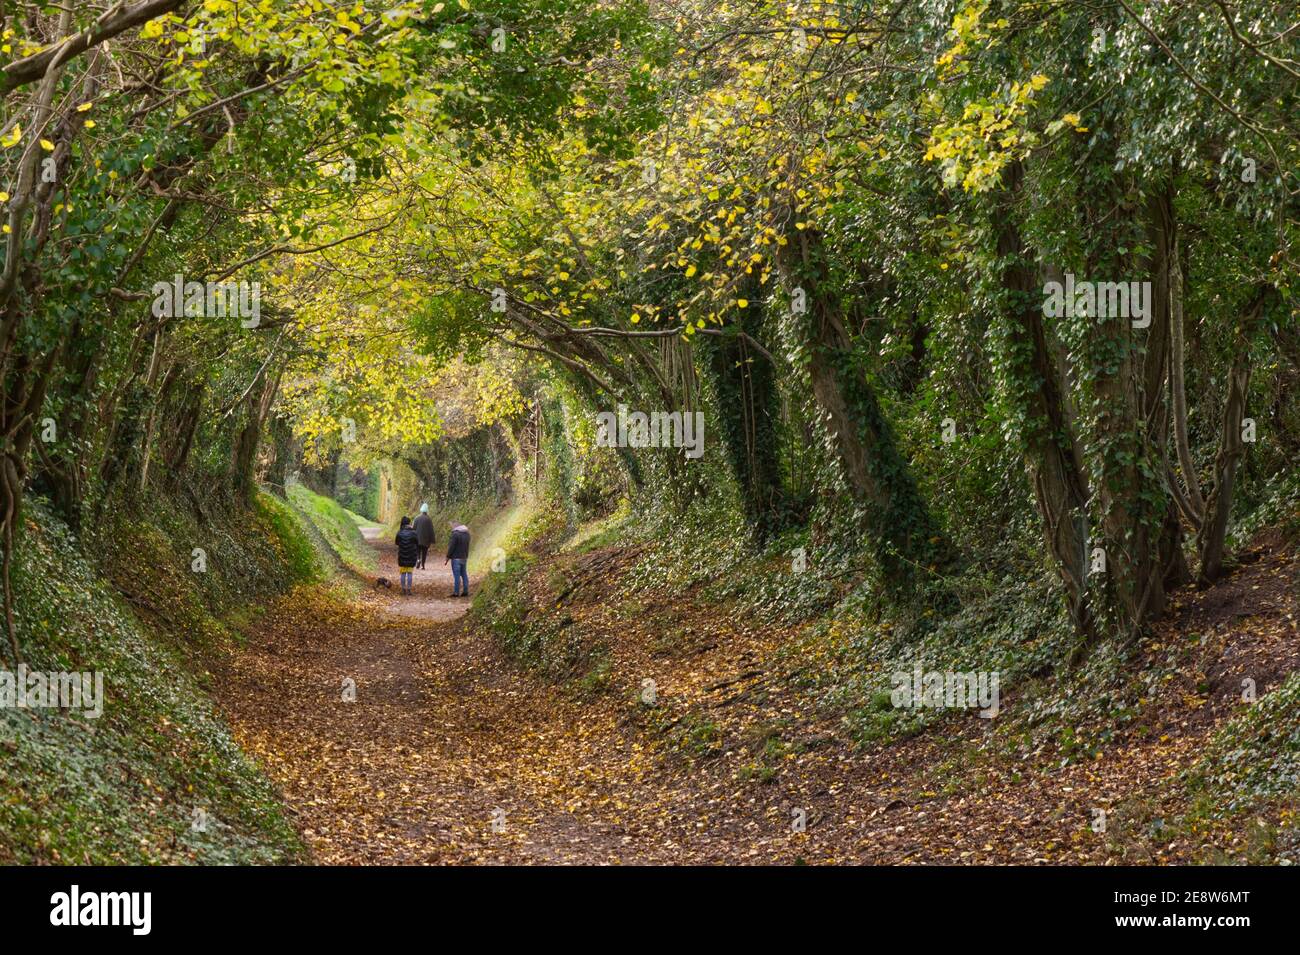 Sunken footpath with overhanging trees forming a tunnel at Halnaker near Chichester, South Downs, West Sussex, England. Autumn (Fall) colours. With pe Stock Photo